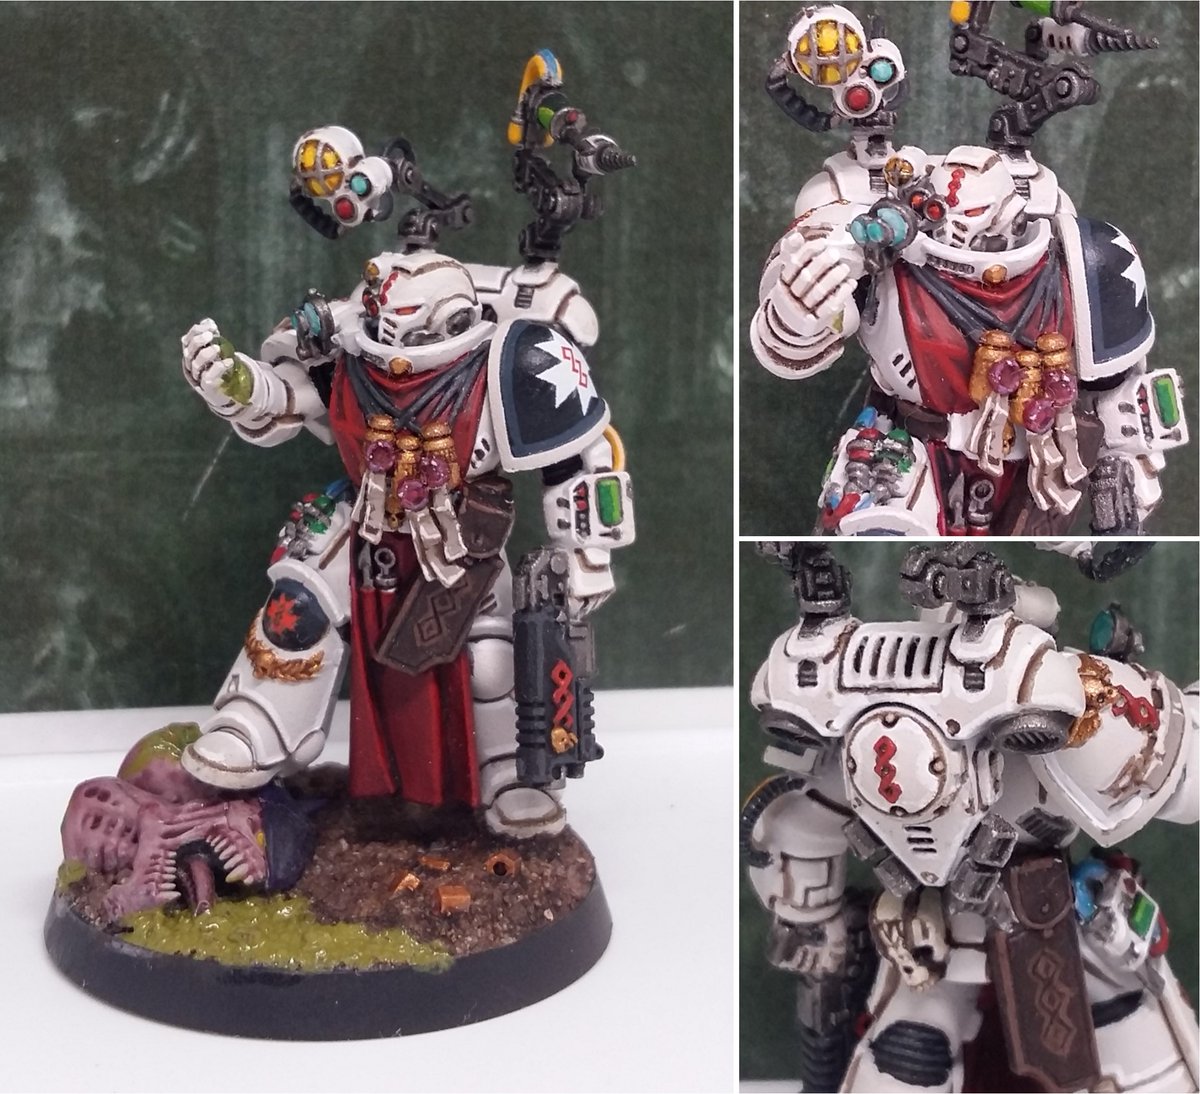 Feeling bit under the weather today. So here's my Apothecary I've painted years ago for my BT 👍

#WarhammerCommunity #warhammer40k #warhammer #PaintingWarhammer #blacktemplars